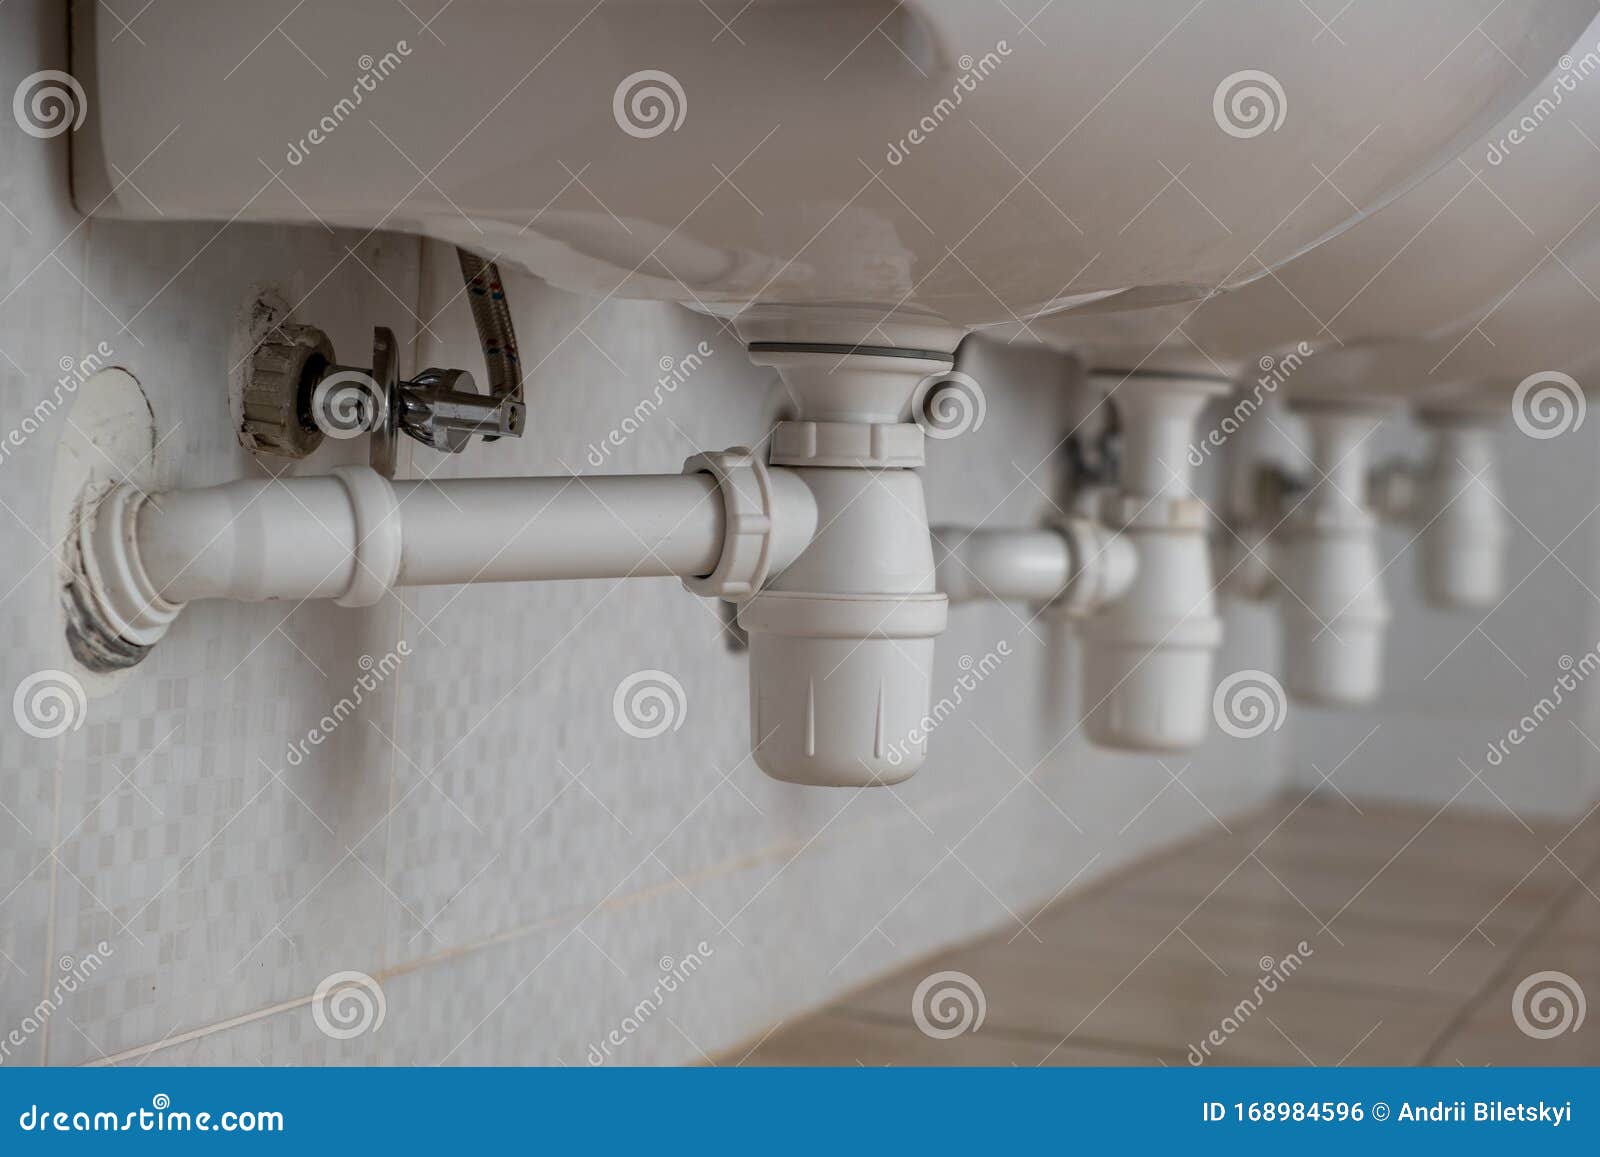 Close Up Of White Plastic Pipe Drain Under Washing Sink In Bathroom Stock Photo Image of